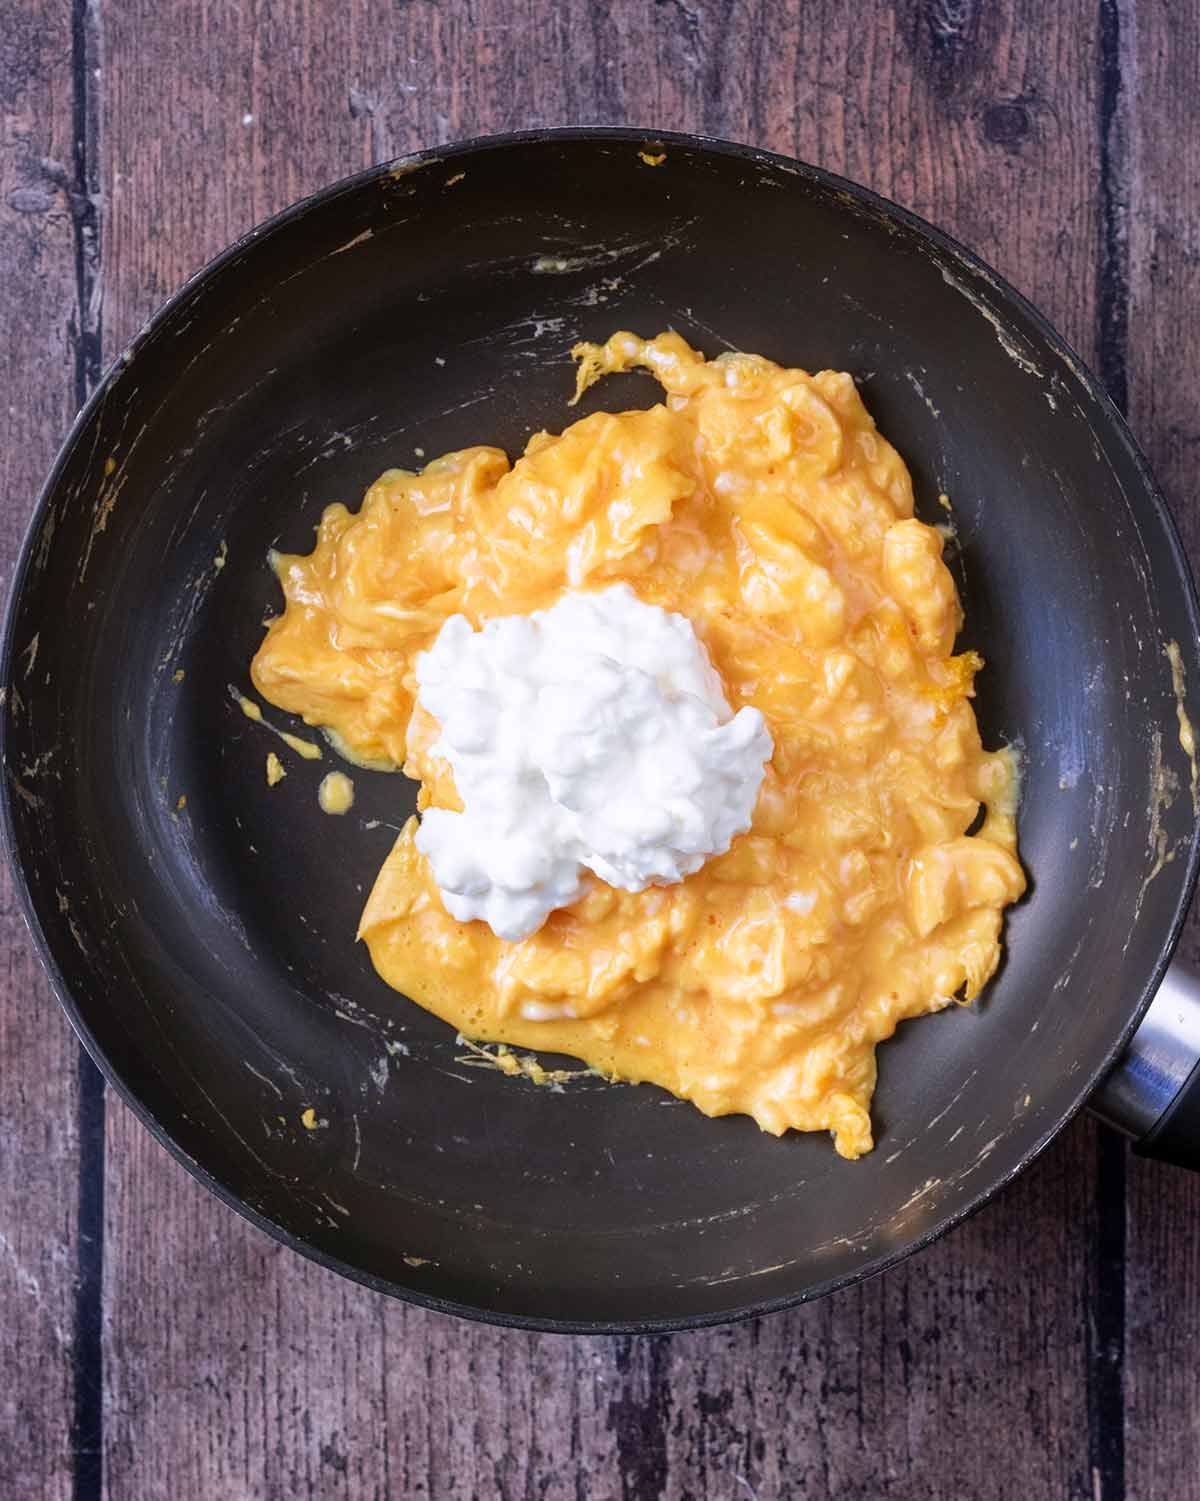 A dollop of cottage cheese on top of the scrambled eggs.